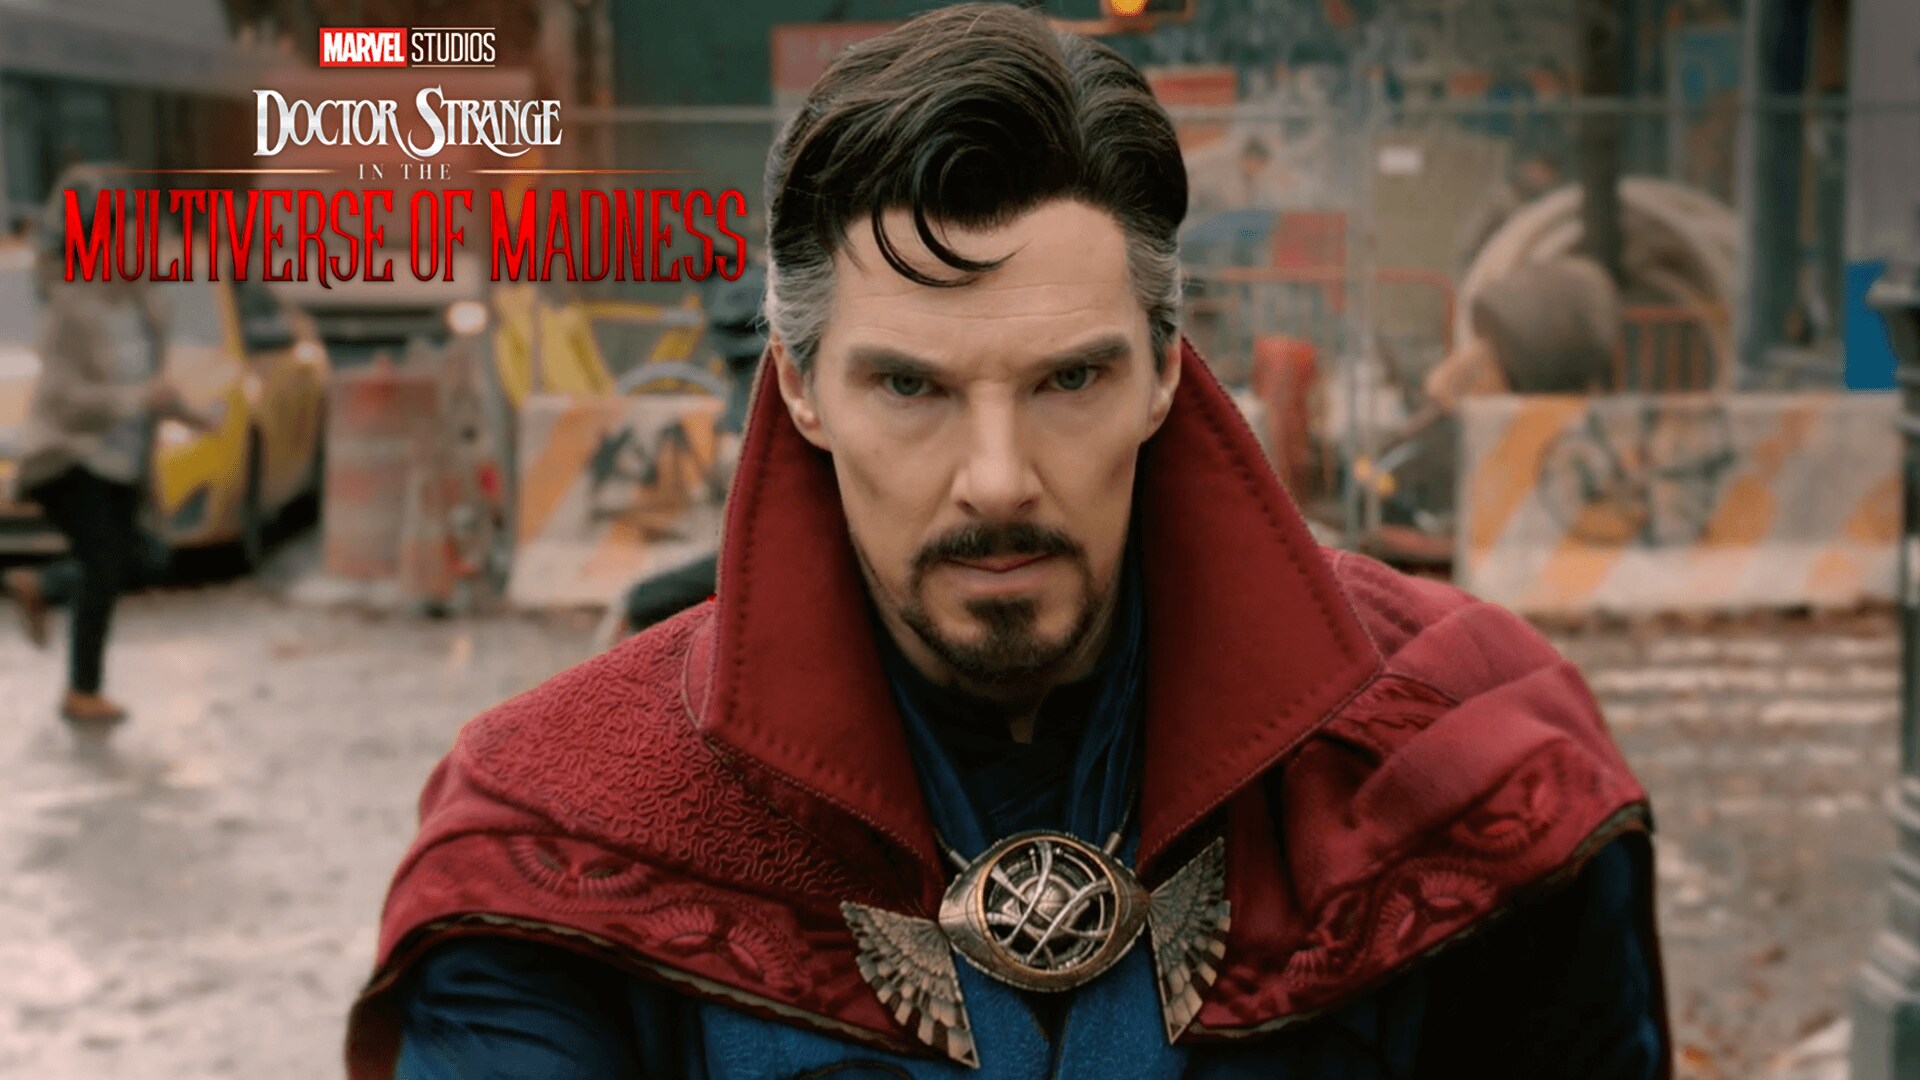 Marvel Studios' Doctor Strange in the Multiverse of Madness | Reckoning